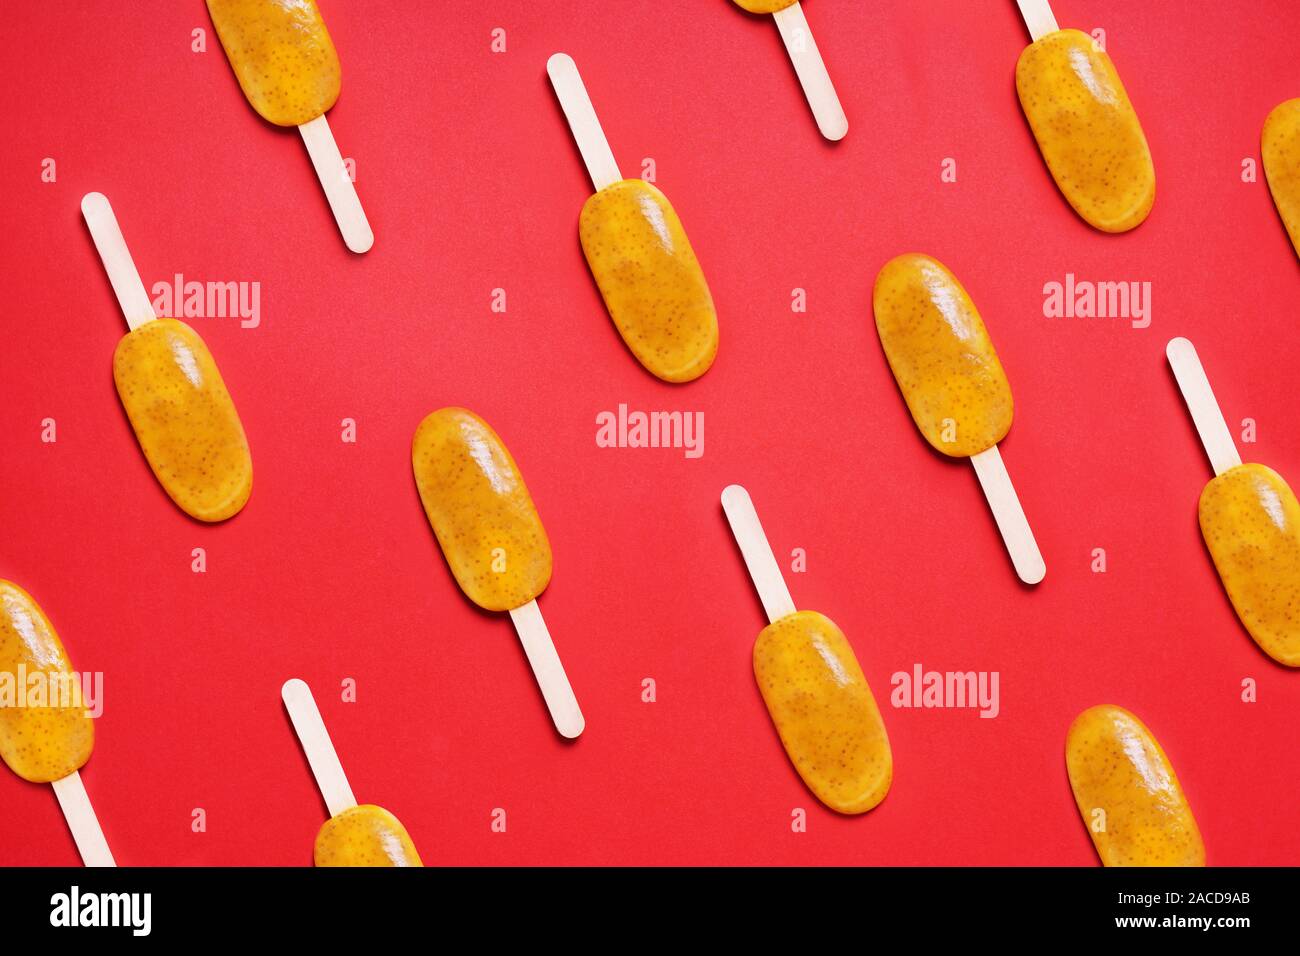 Download Yellow Ice Lolly Fruit High Resolution Stock Photography And Images Alamy Yellowimages Mockups